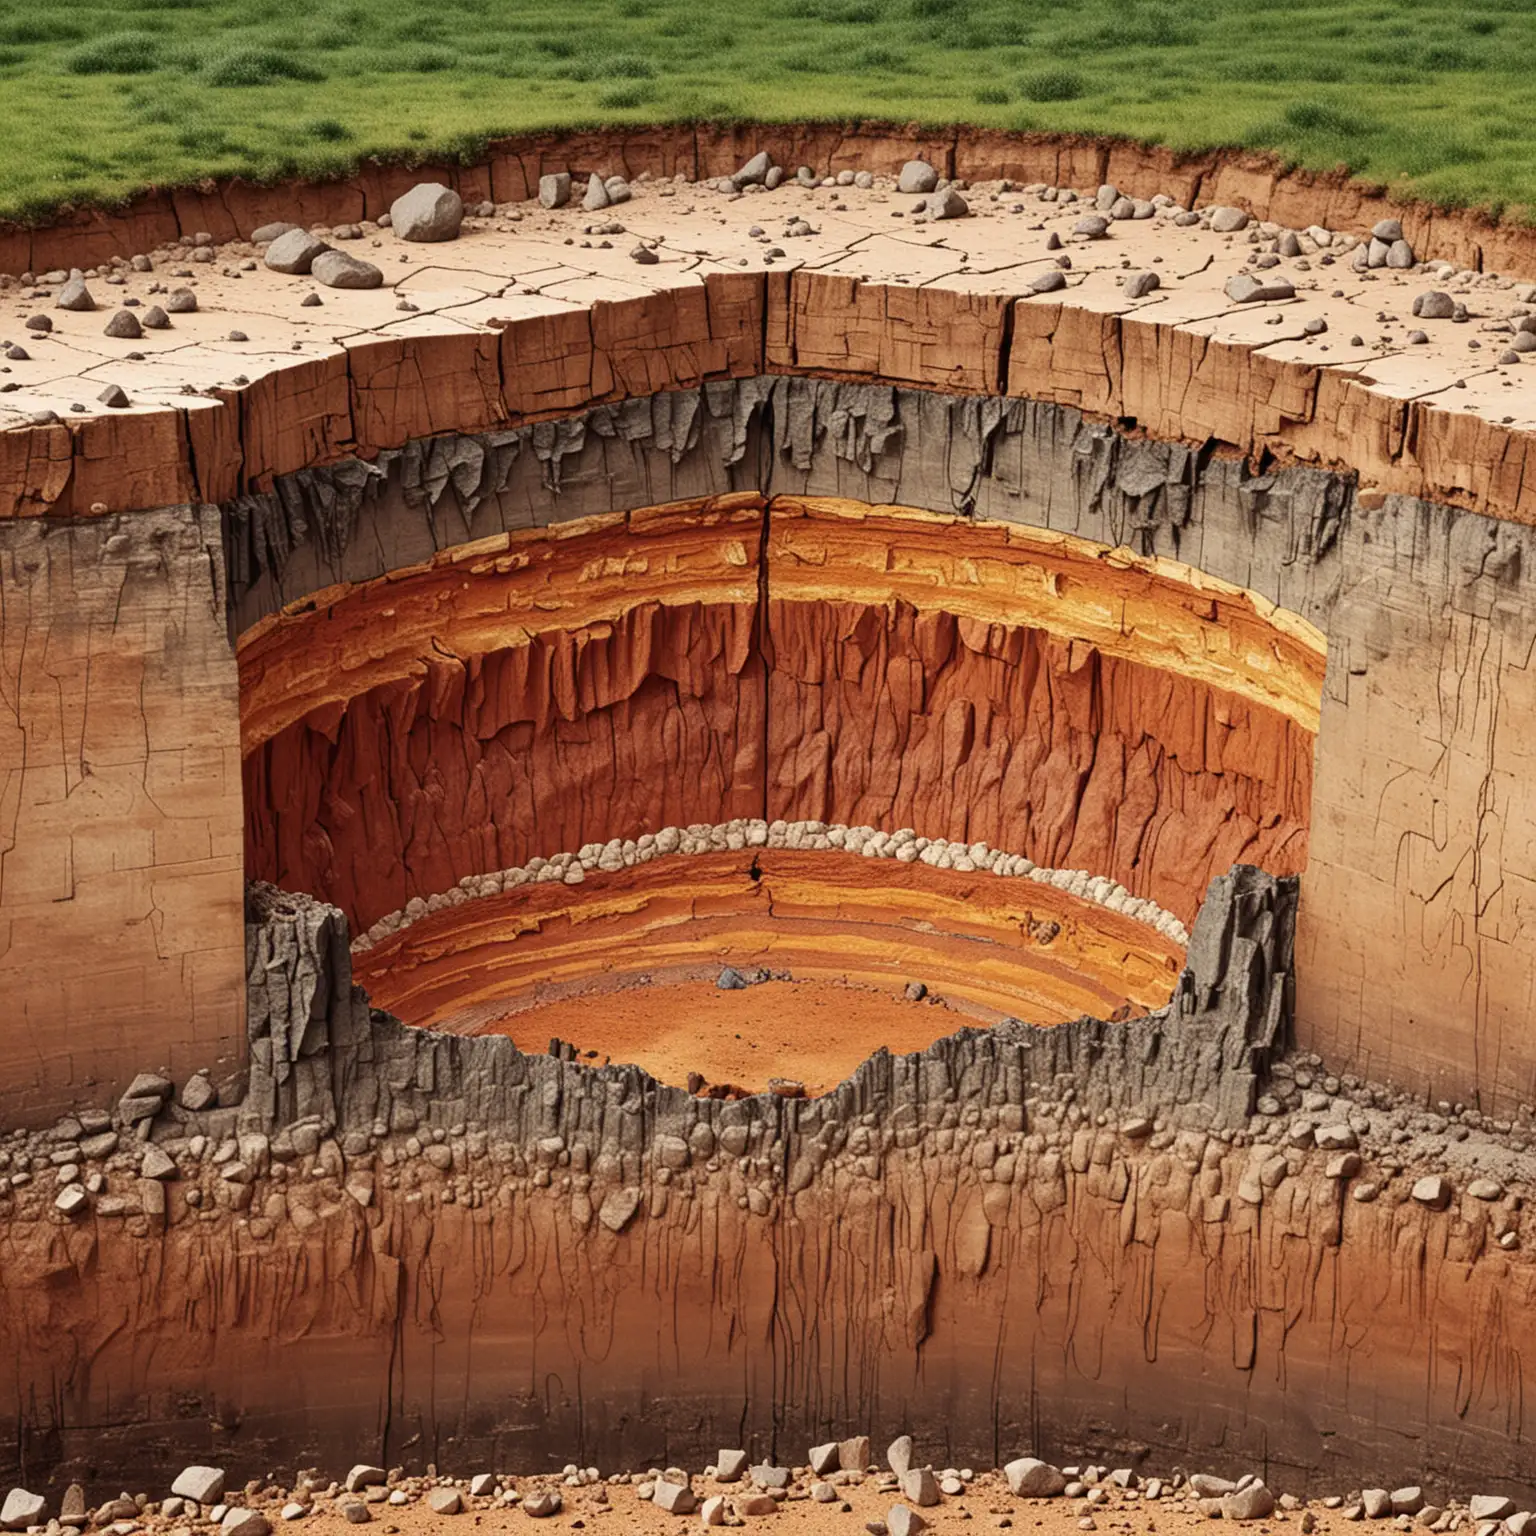 CrossSection-Illustration-of-Earths-Crust-Layers-and-Structure